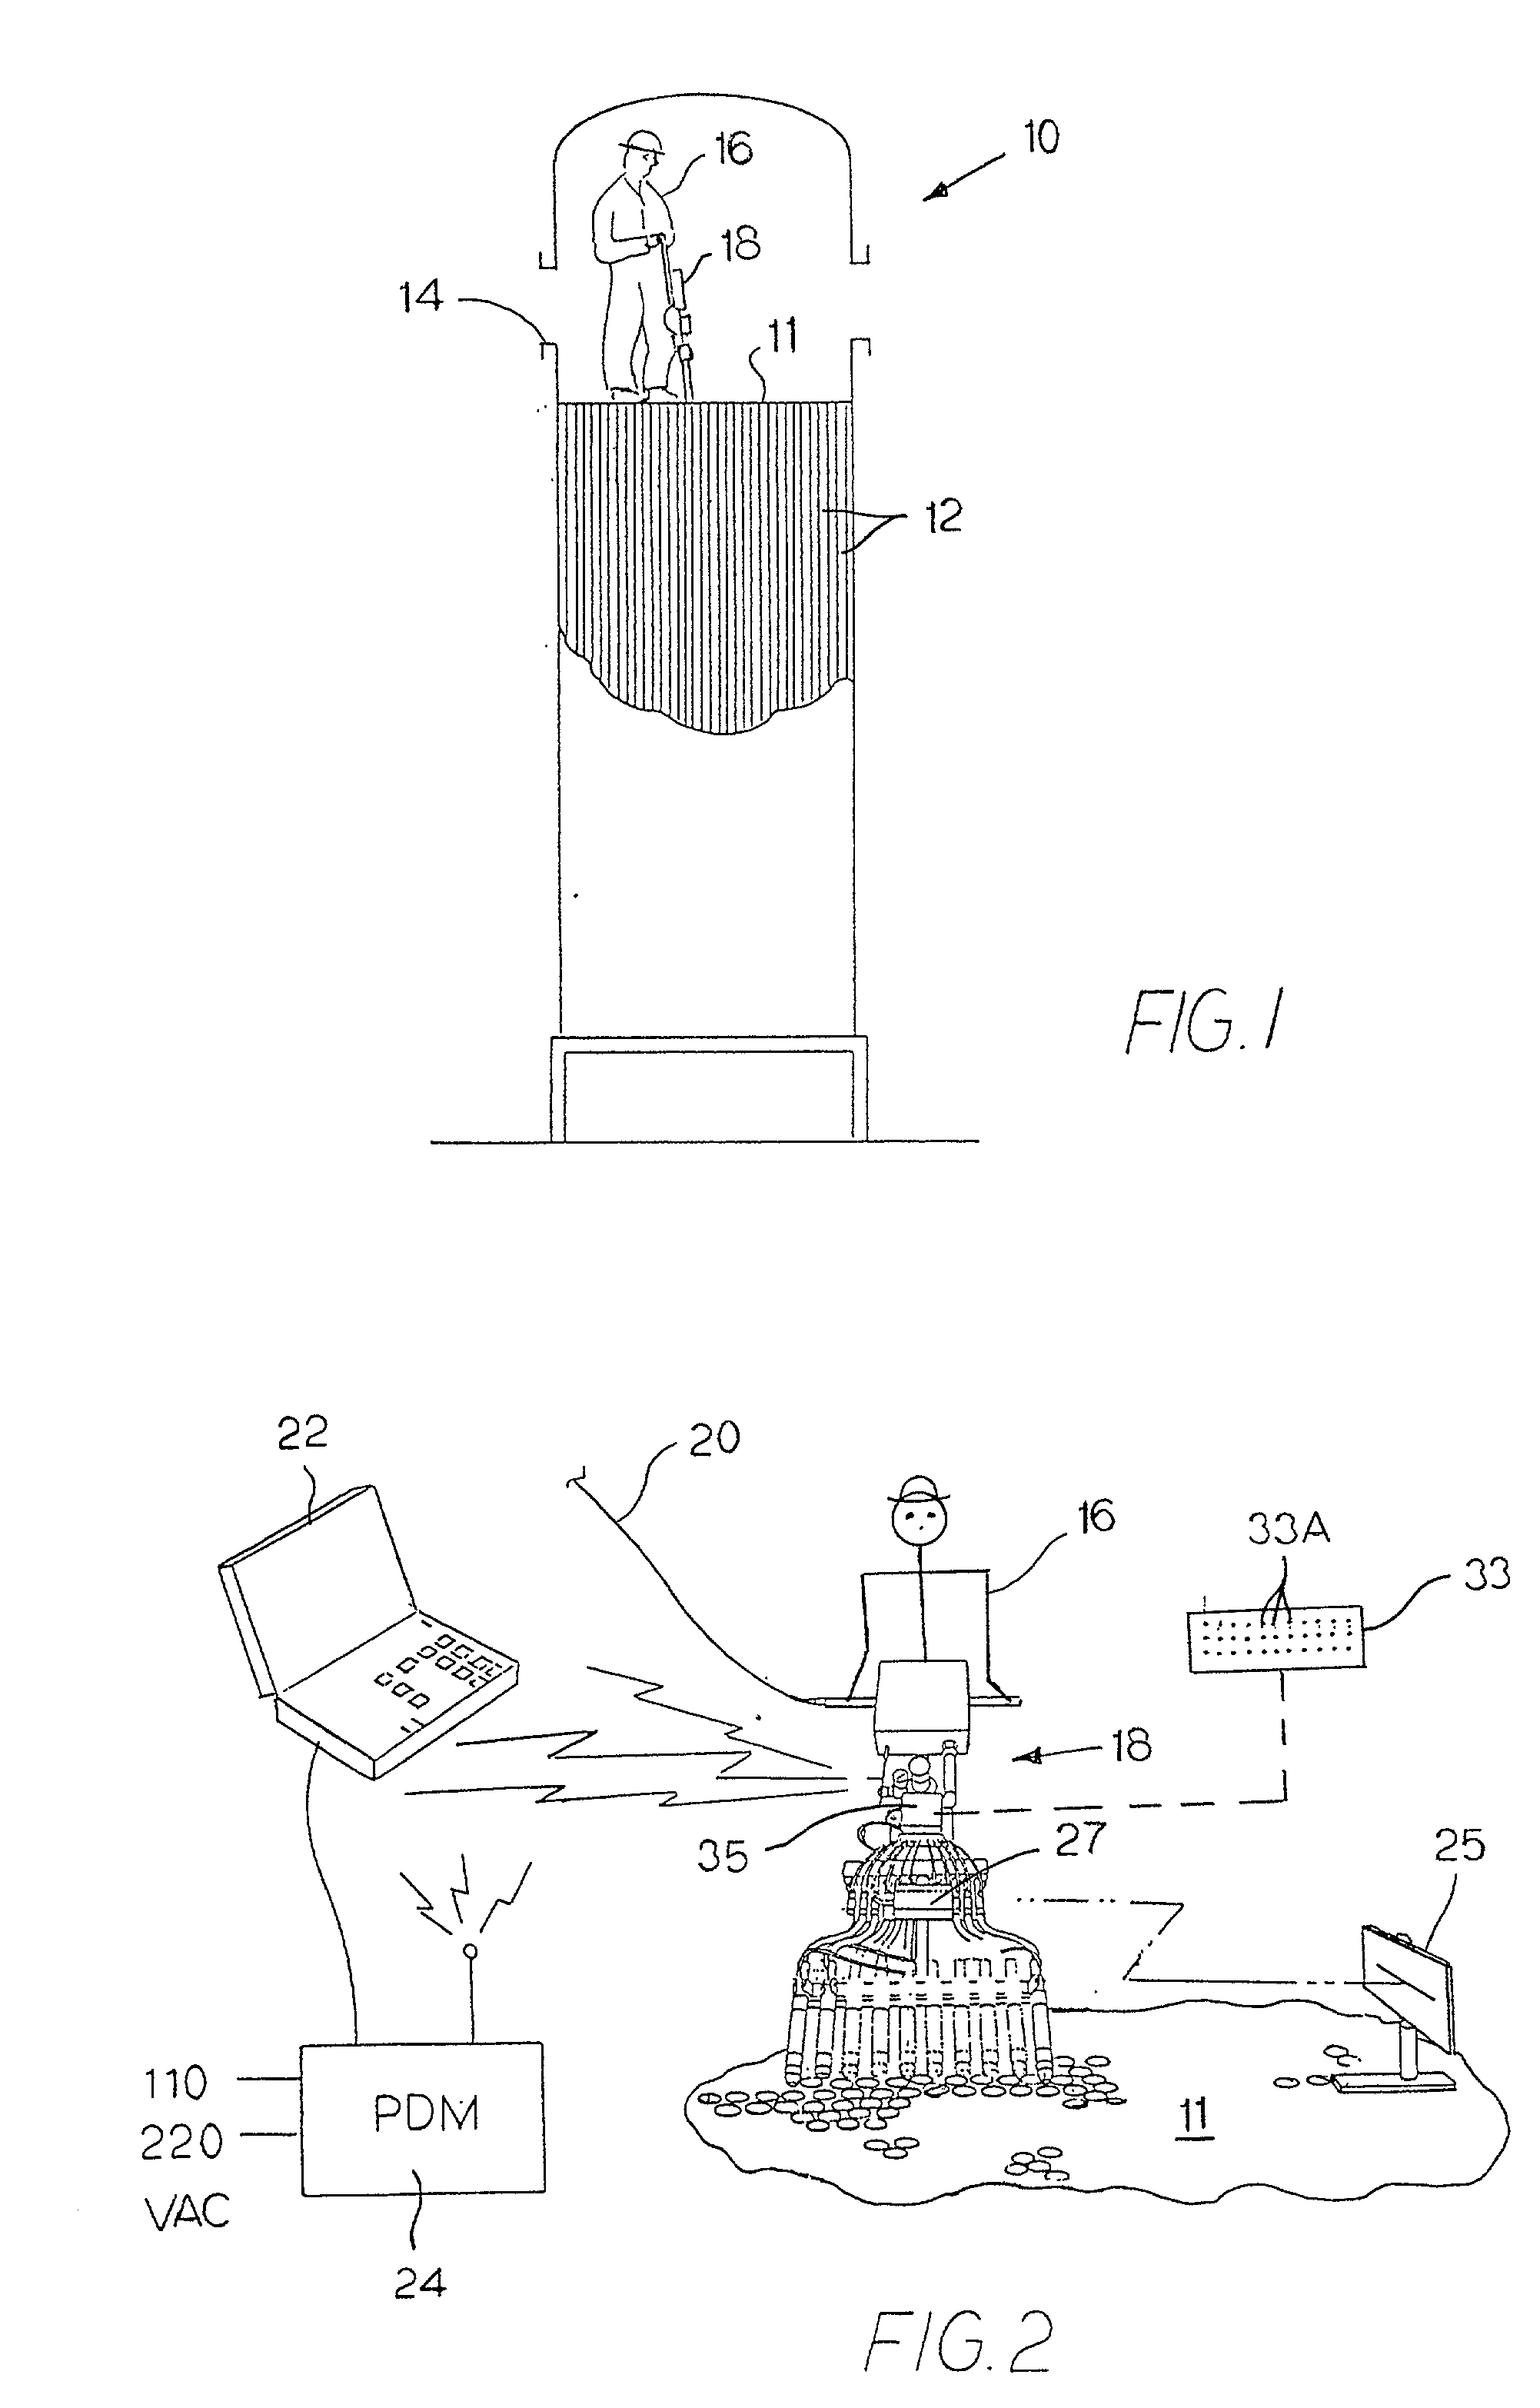 Device and method for blowing down and measuring the back pressure of chemical reactor tubes